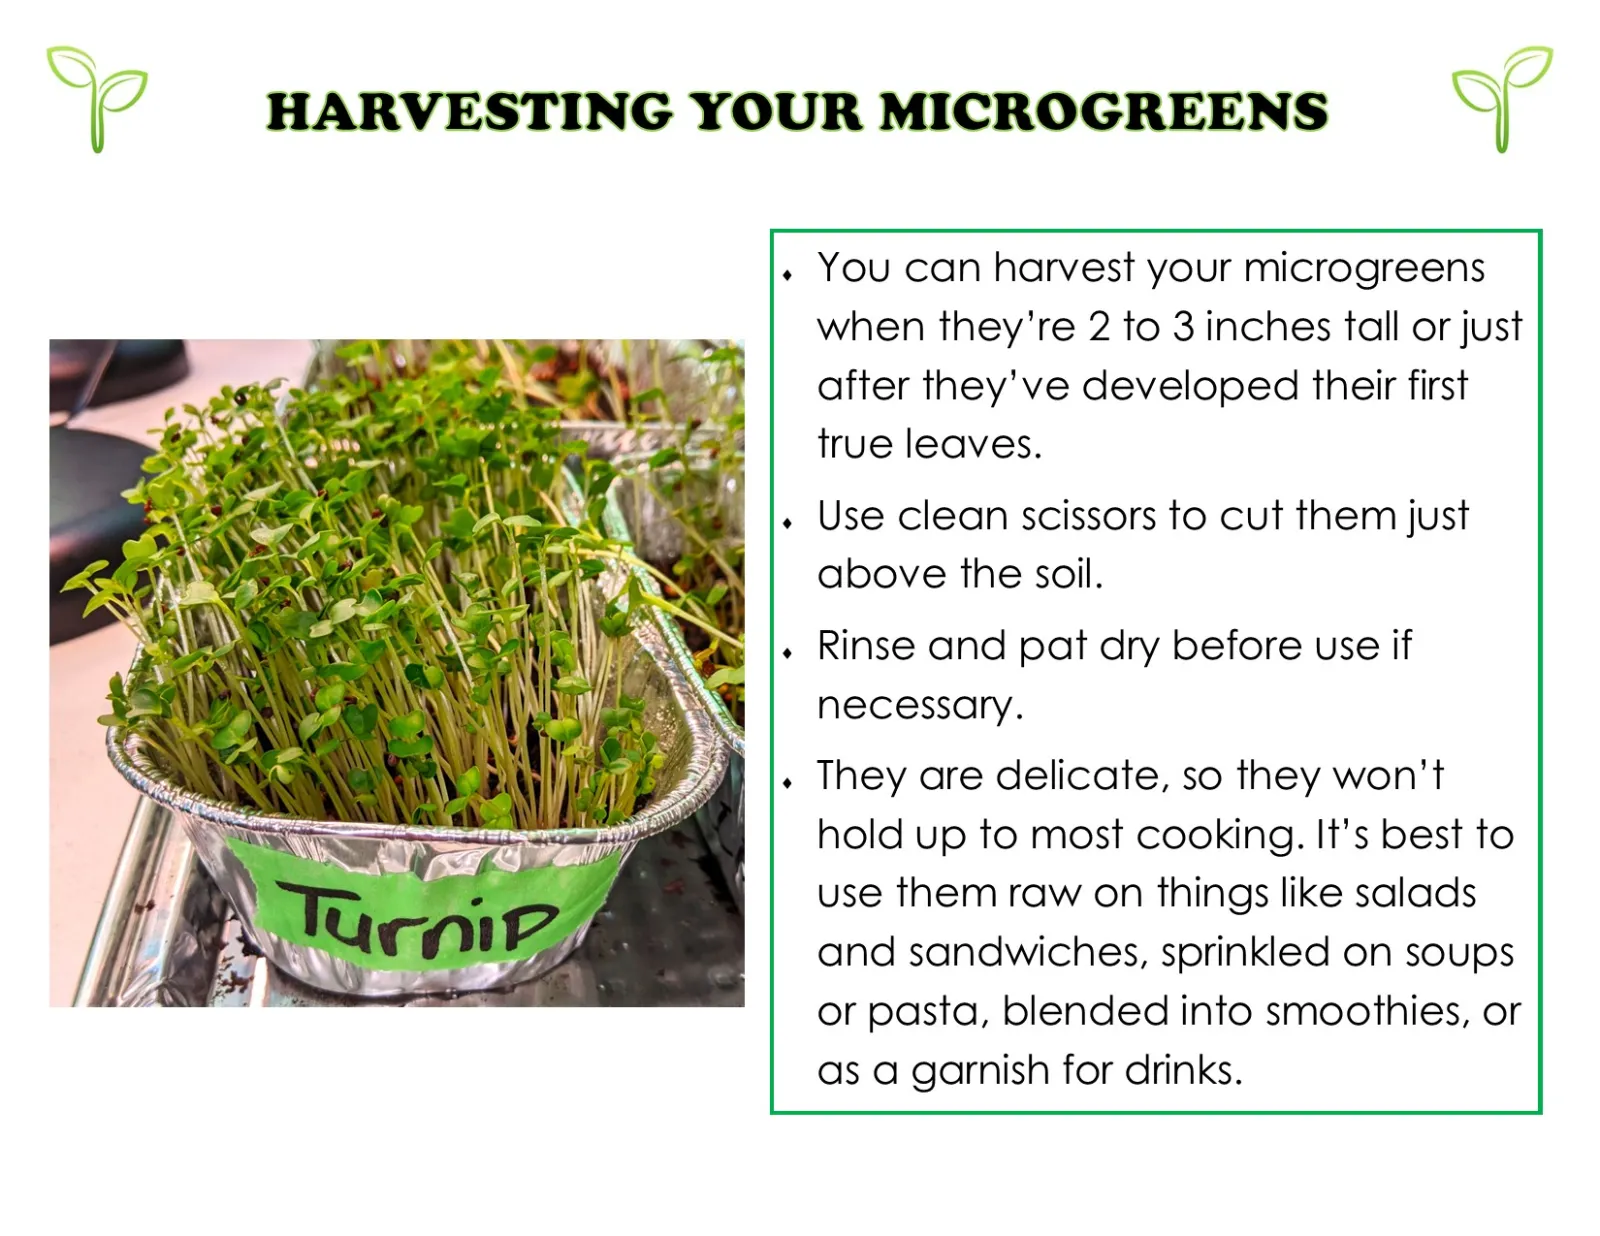 This is a wall of text about harvesting and using microgreens